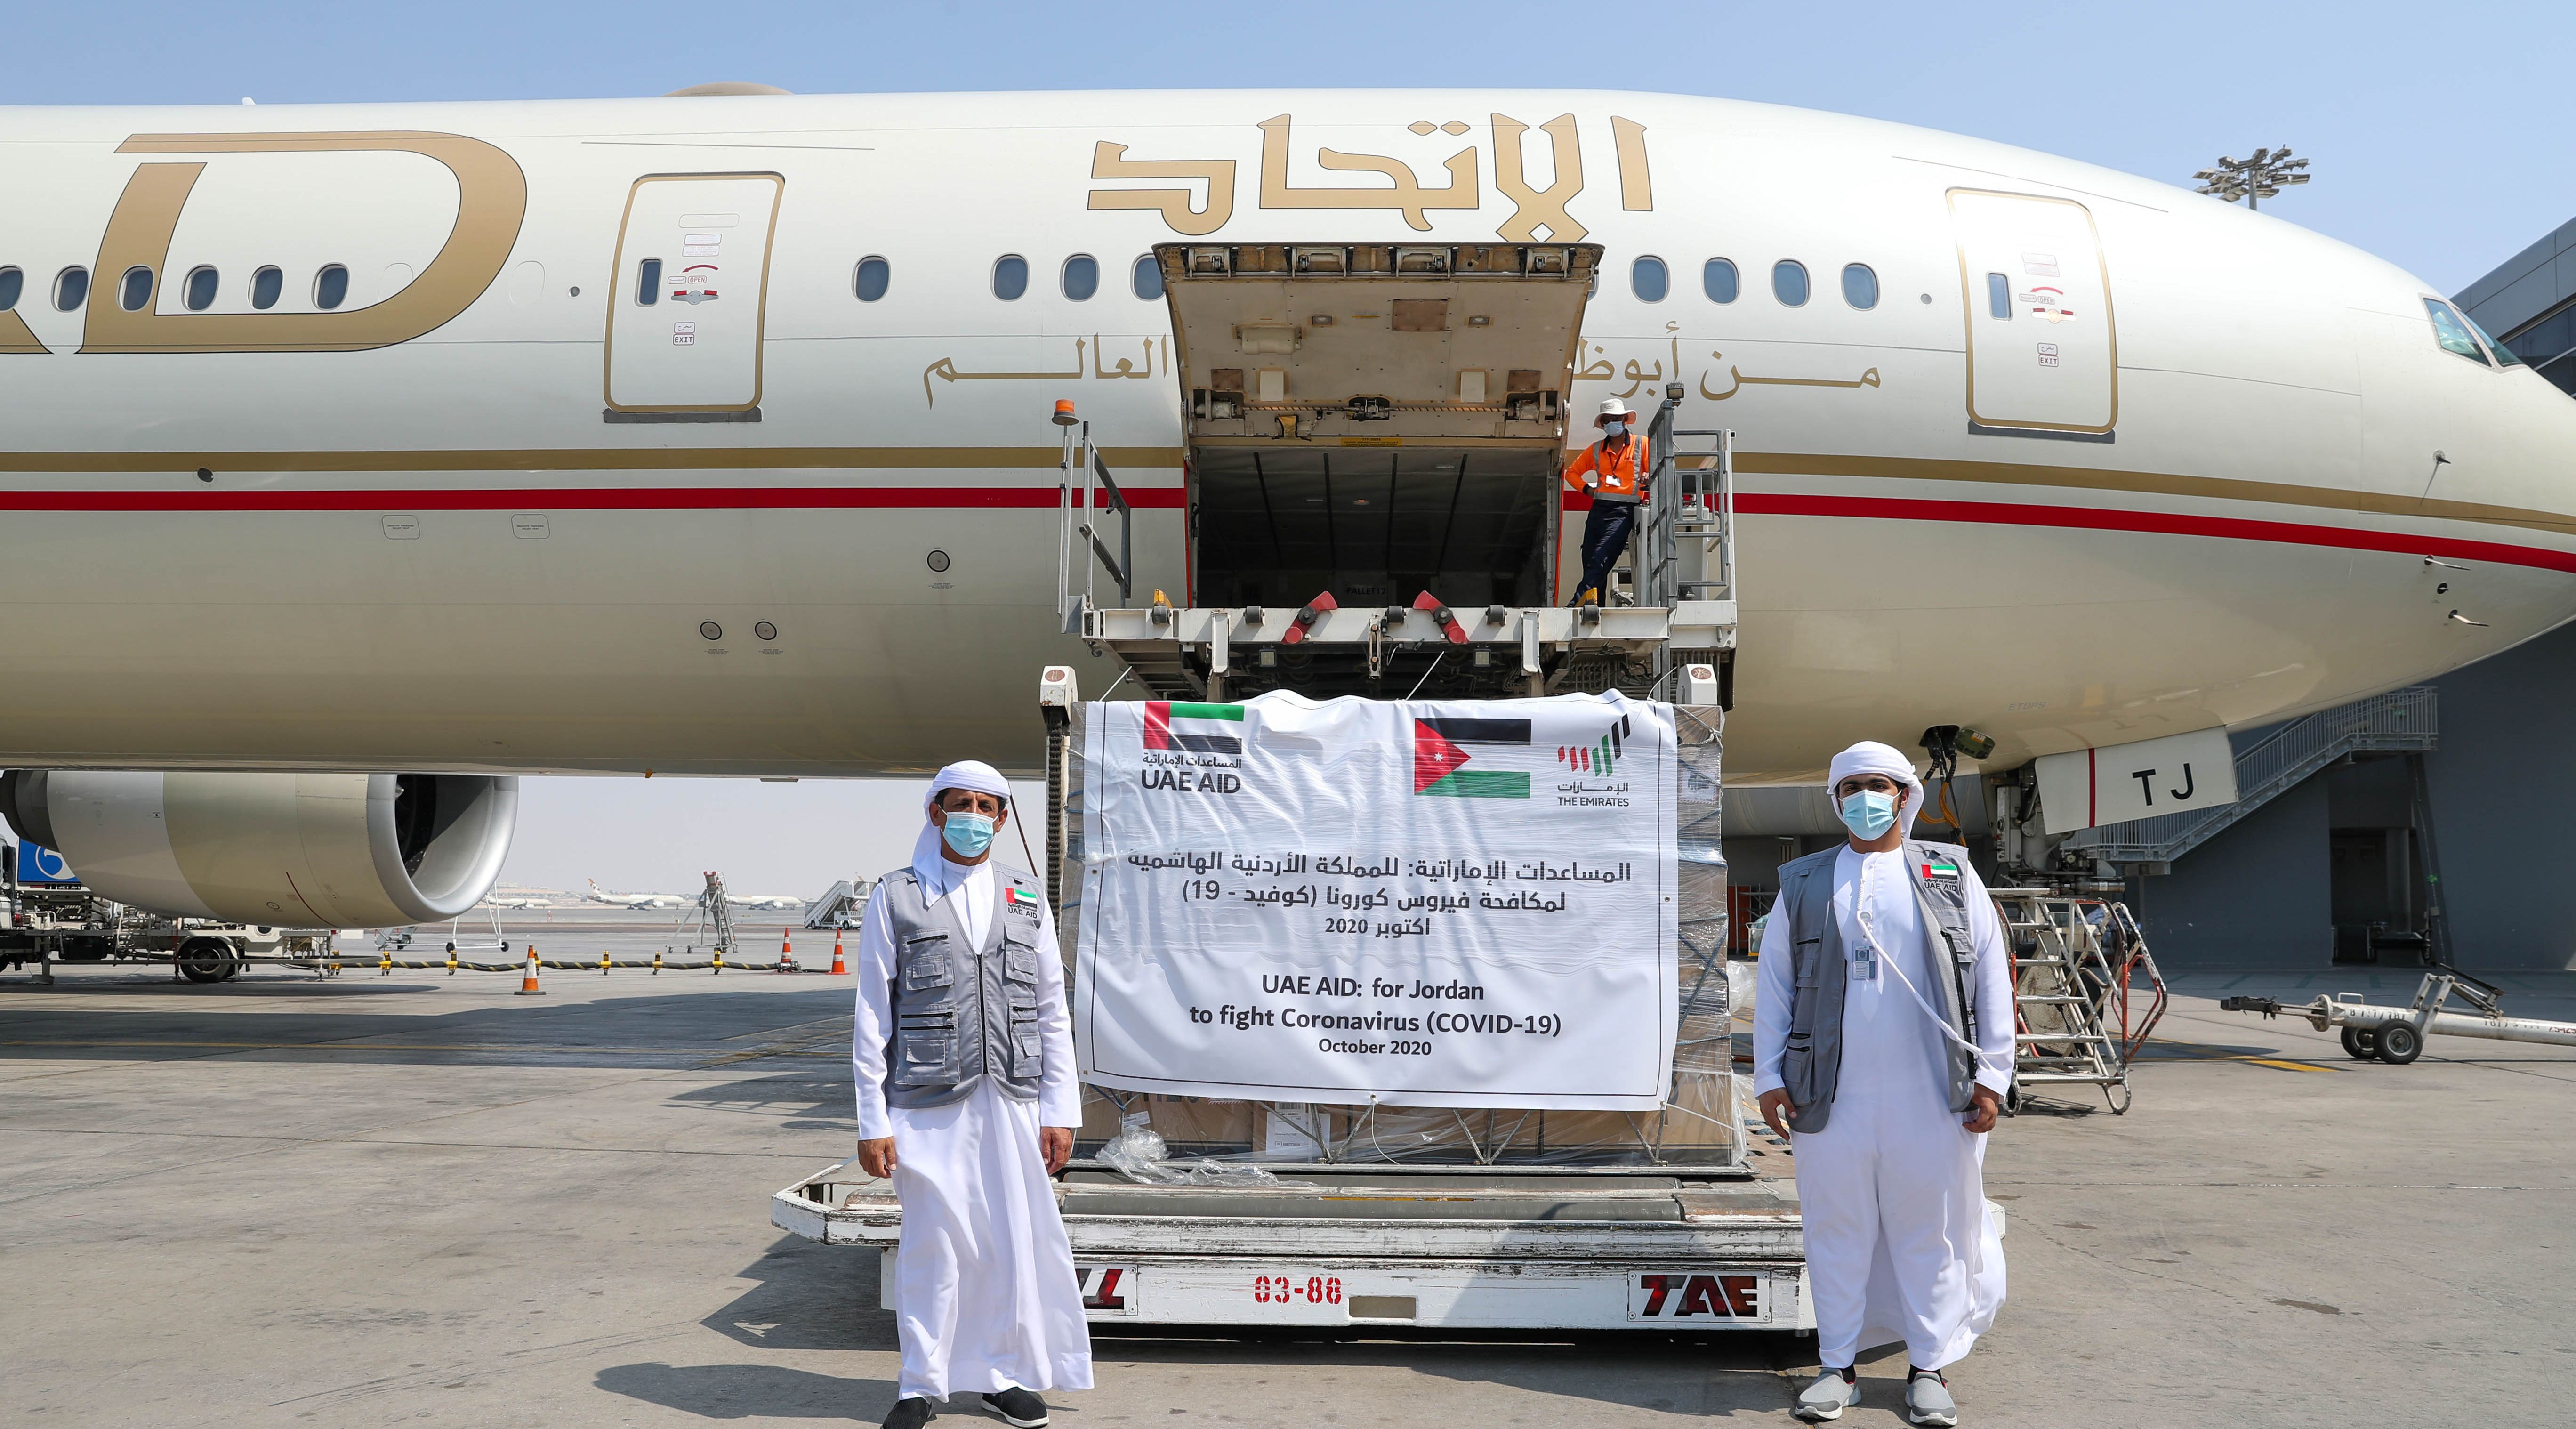 UAE sends second medical aid shipment to Jordan in fight against COVID-19